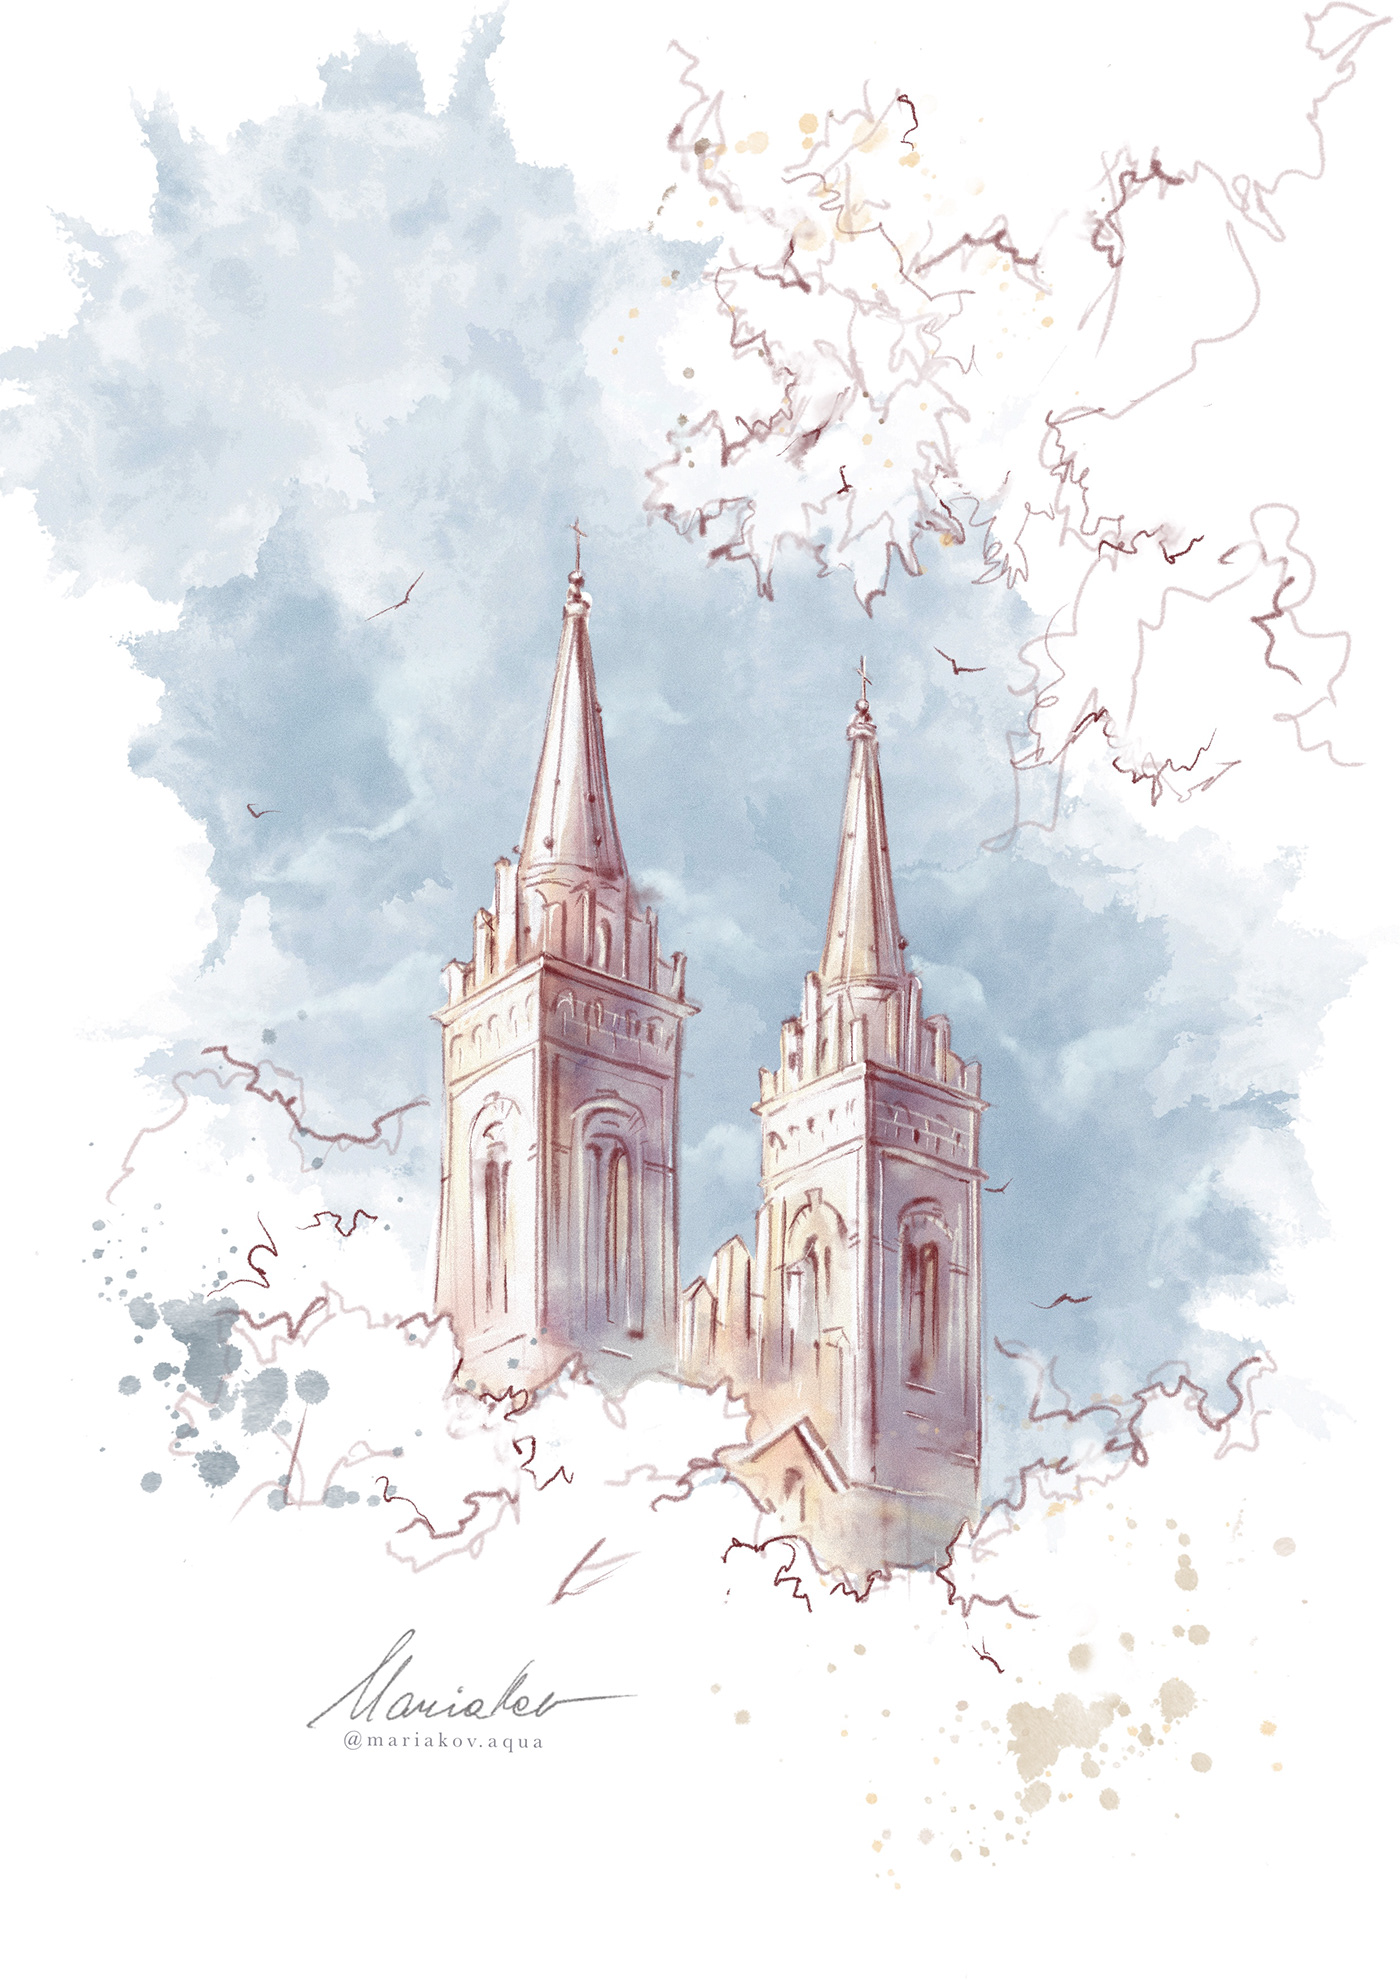 sketch sketching graphic arts architecture cathedral church building sketch Architectural Sketch venue illustration